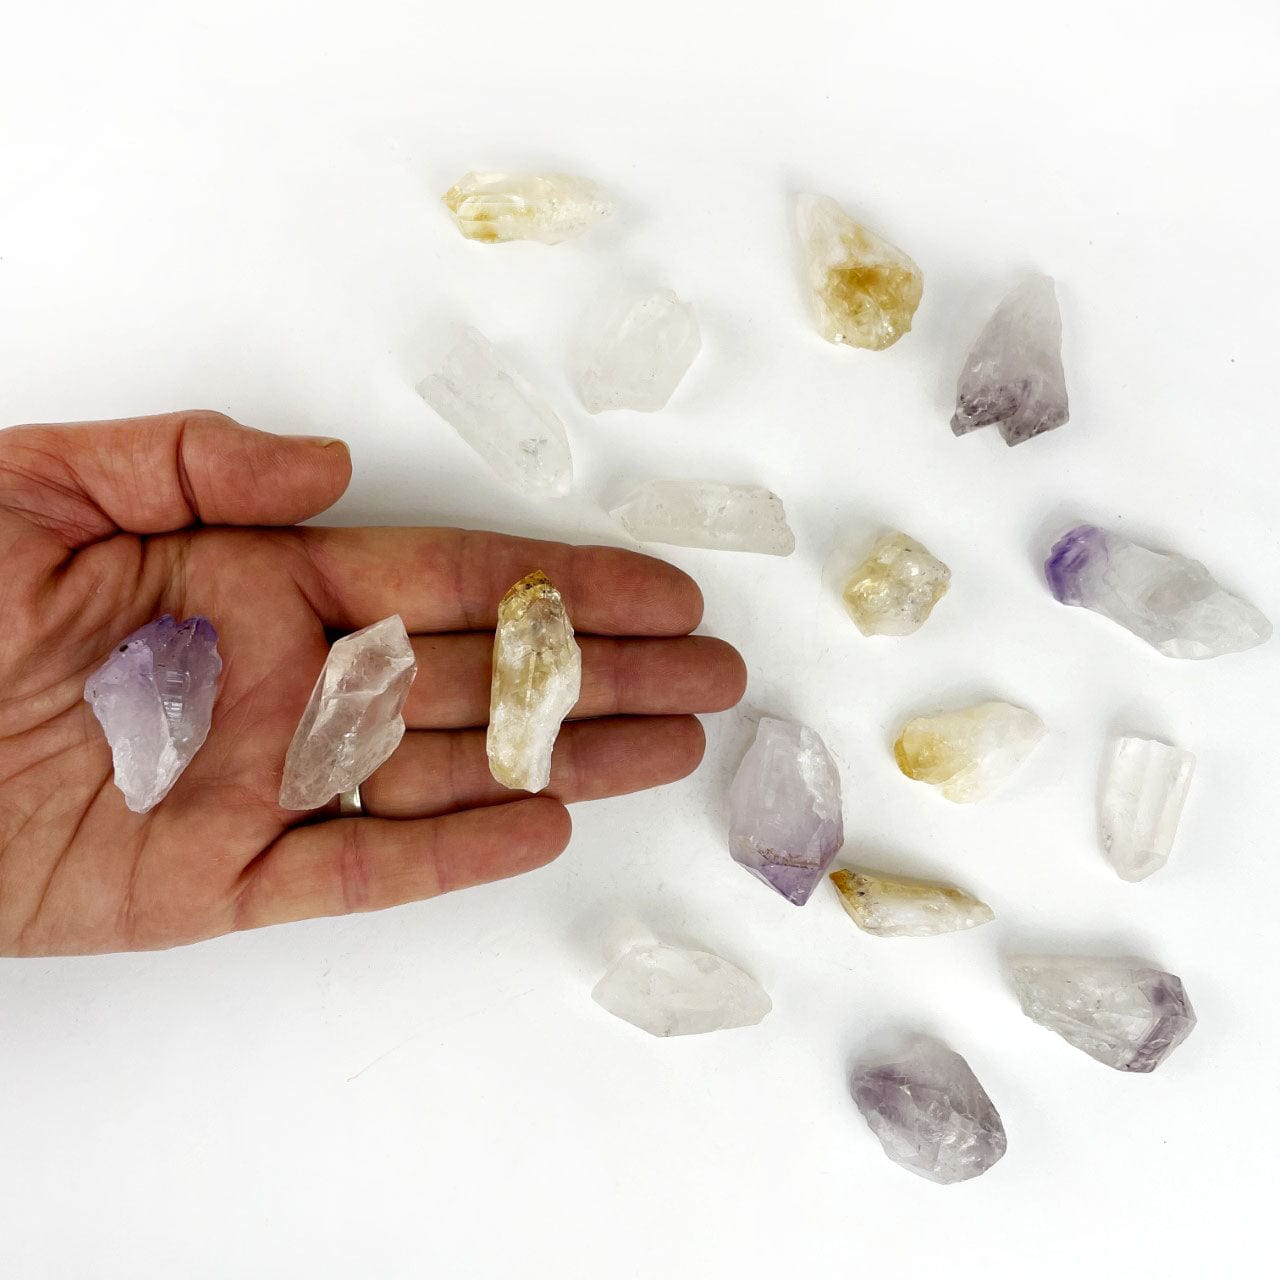 Triple Energy Set of Quartz, Amethyst and Citrine Points  in a hand to show size